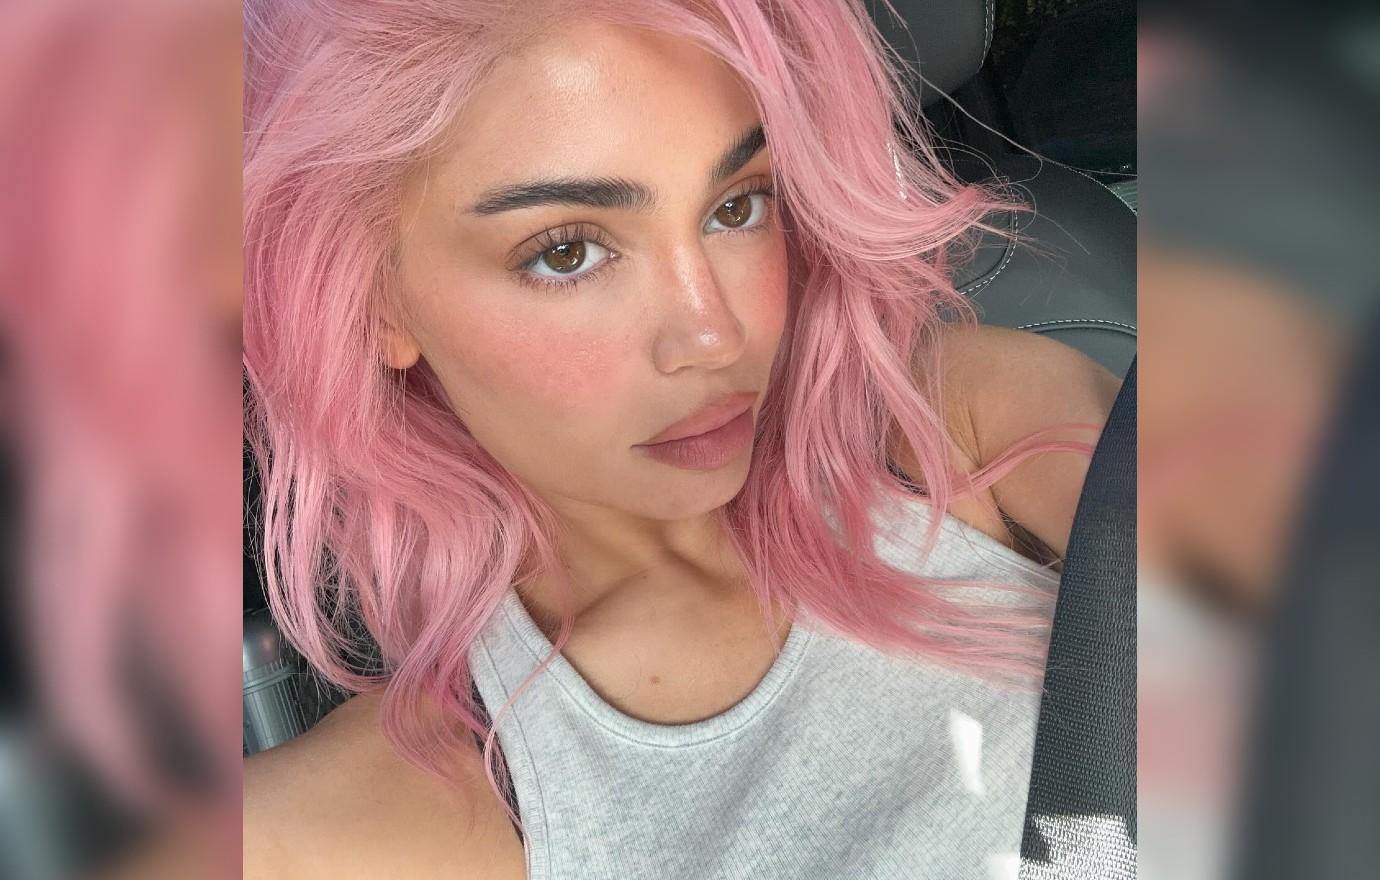 King' Kylie Jenner Shocks Fans With Return Of Pink Hair: Photos